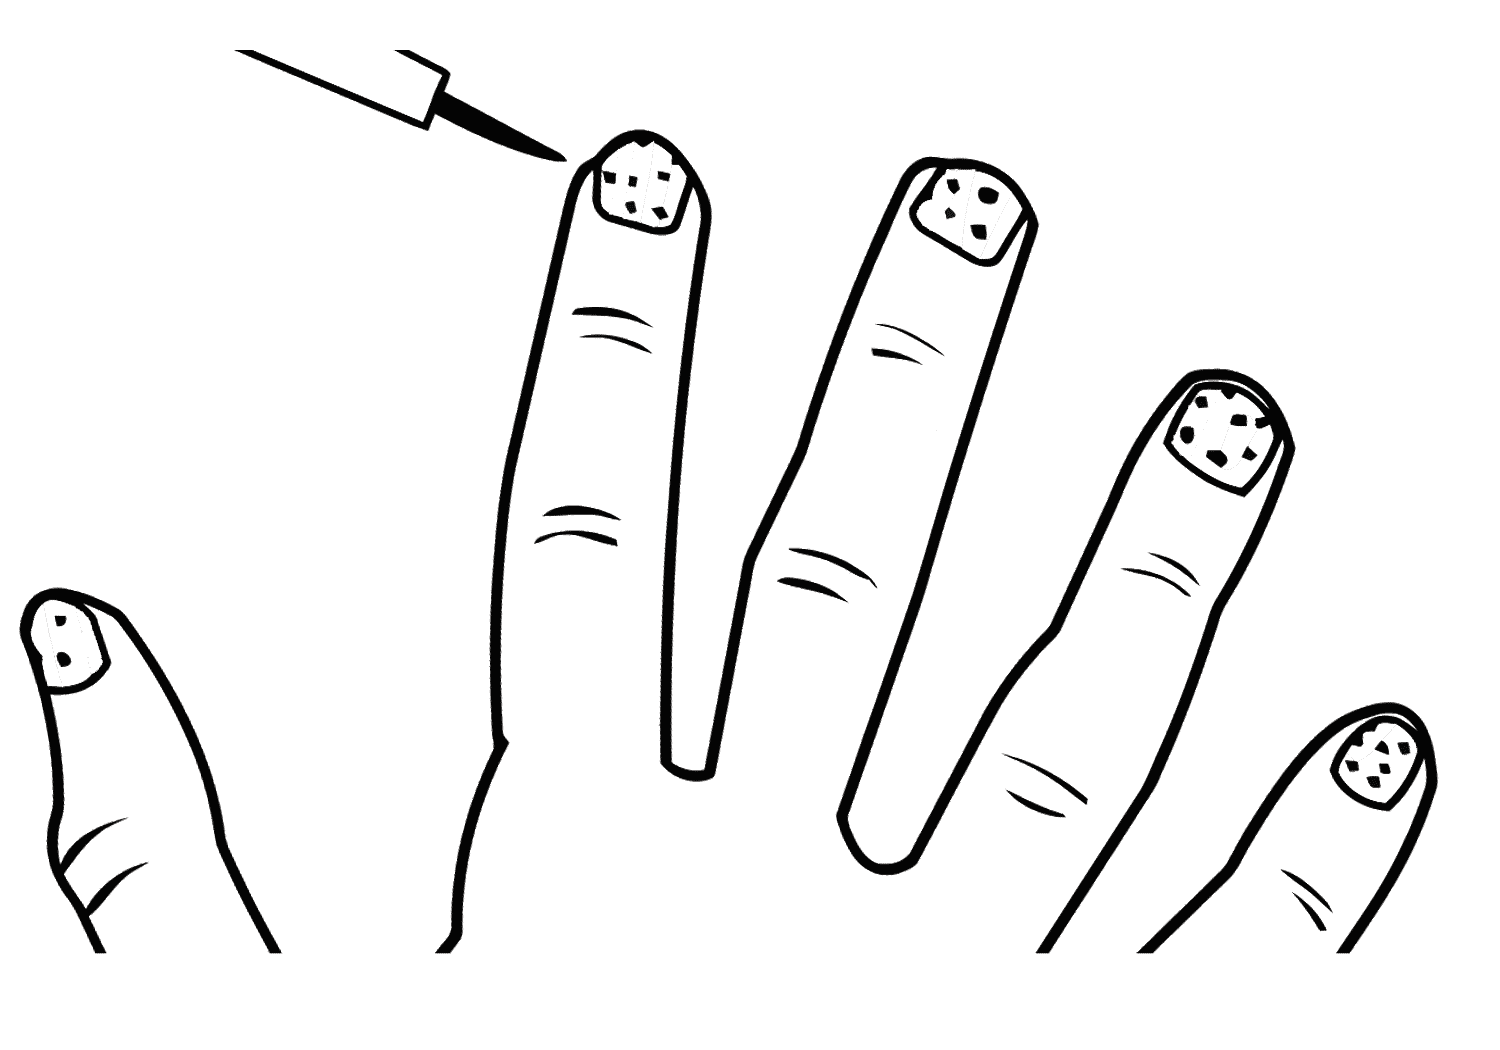 3. Nail Salon Coloring Pages for Adults - wide 7